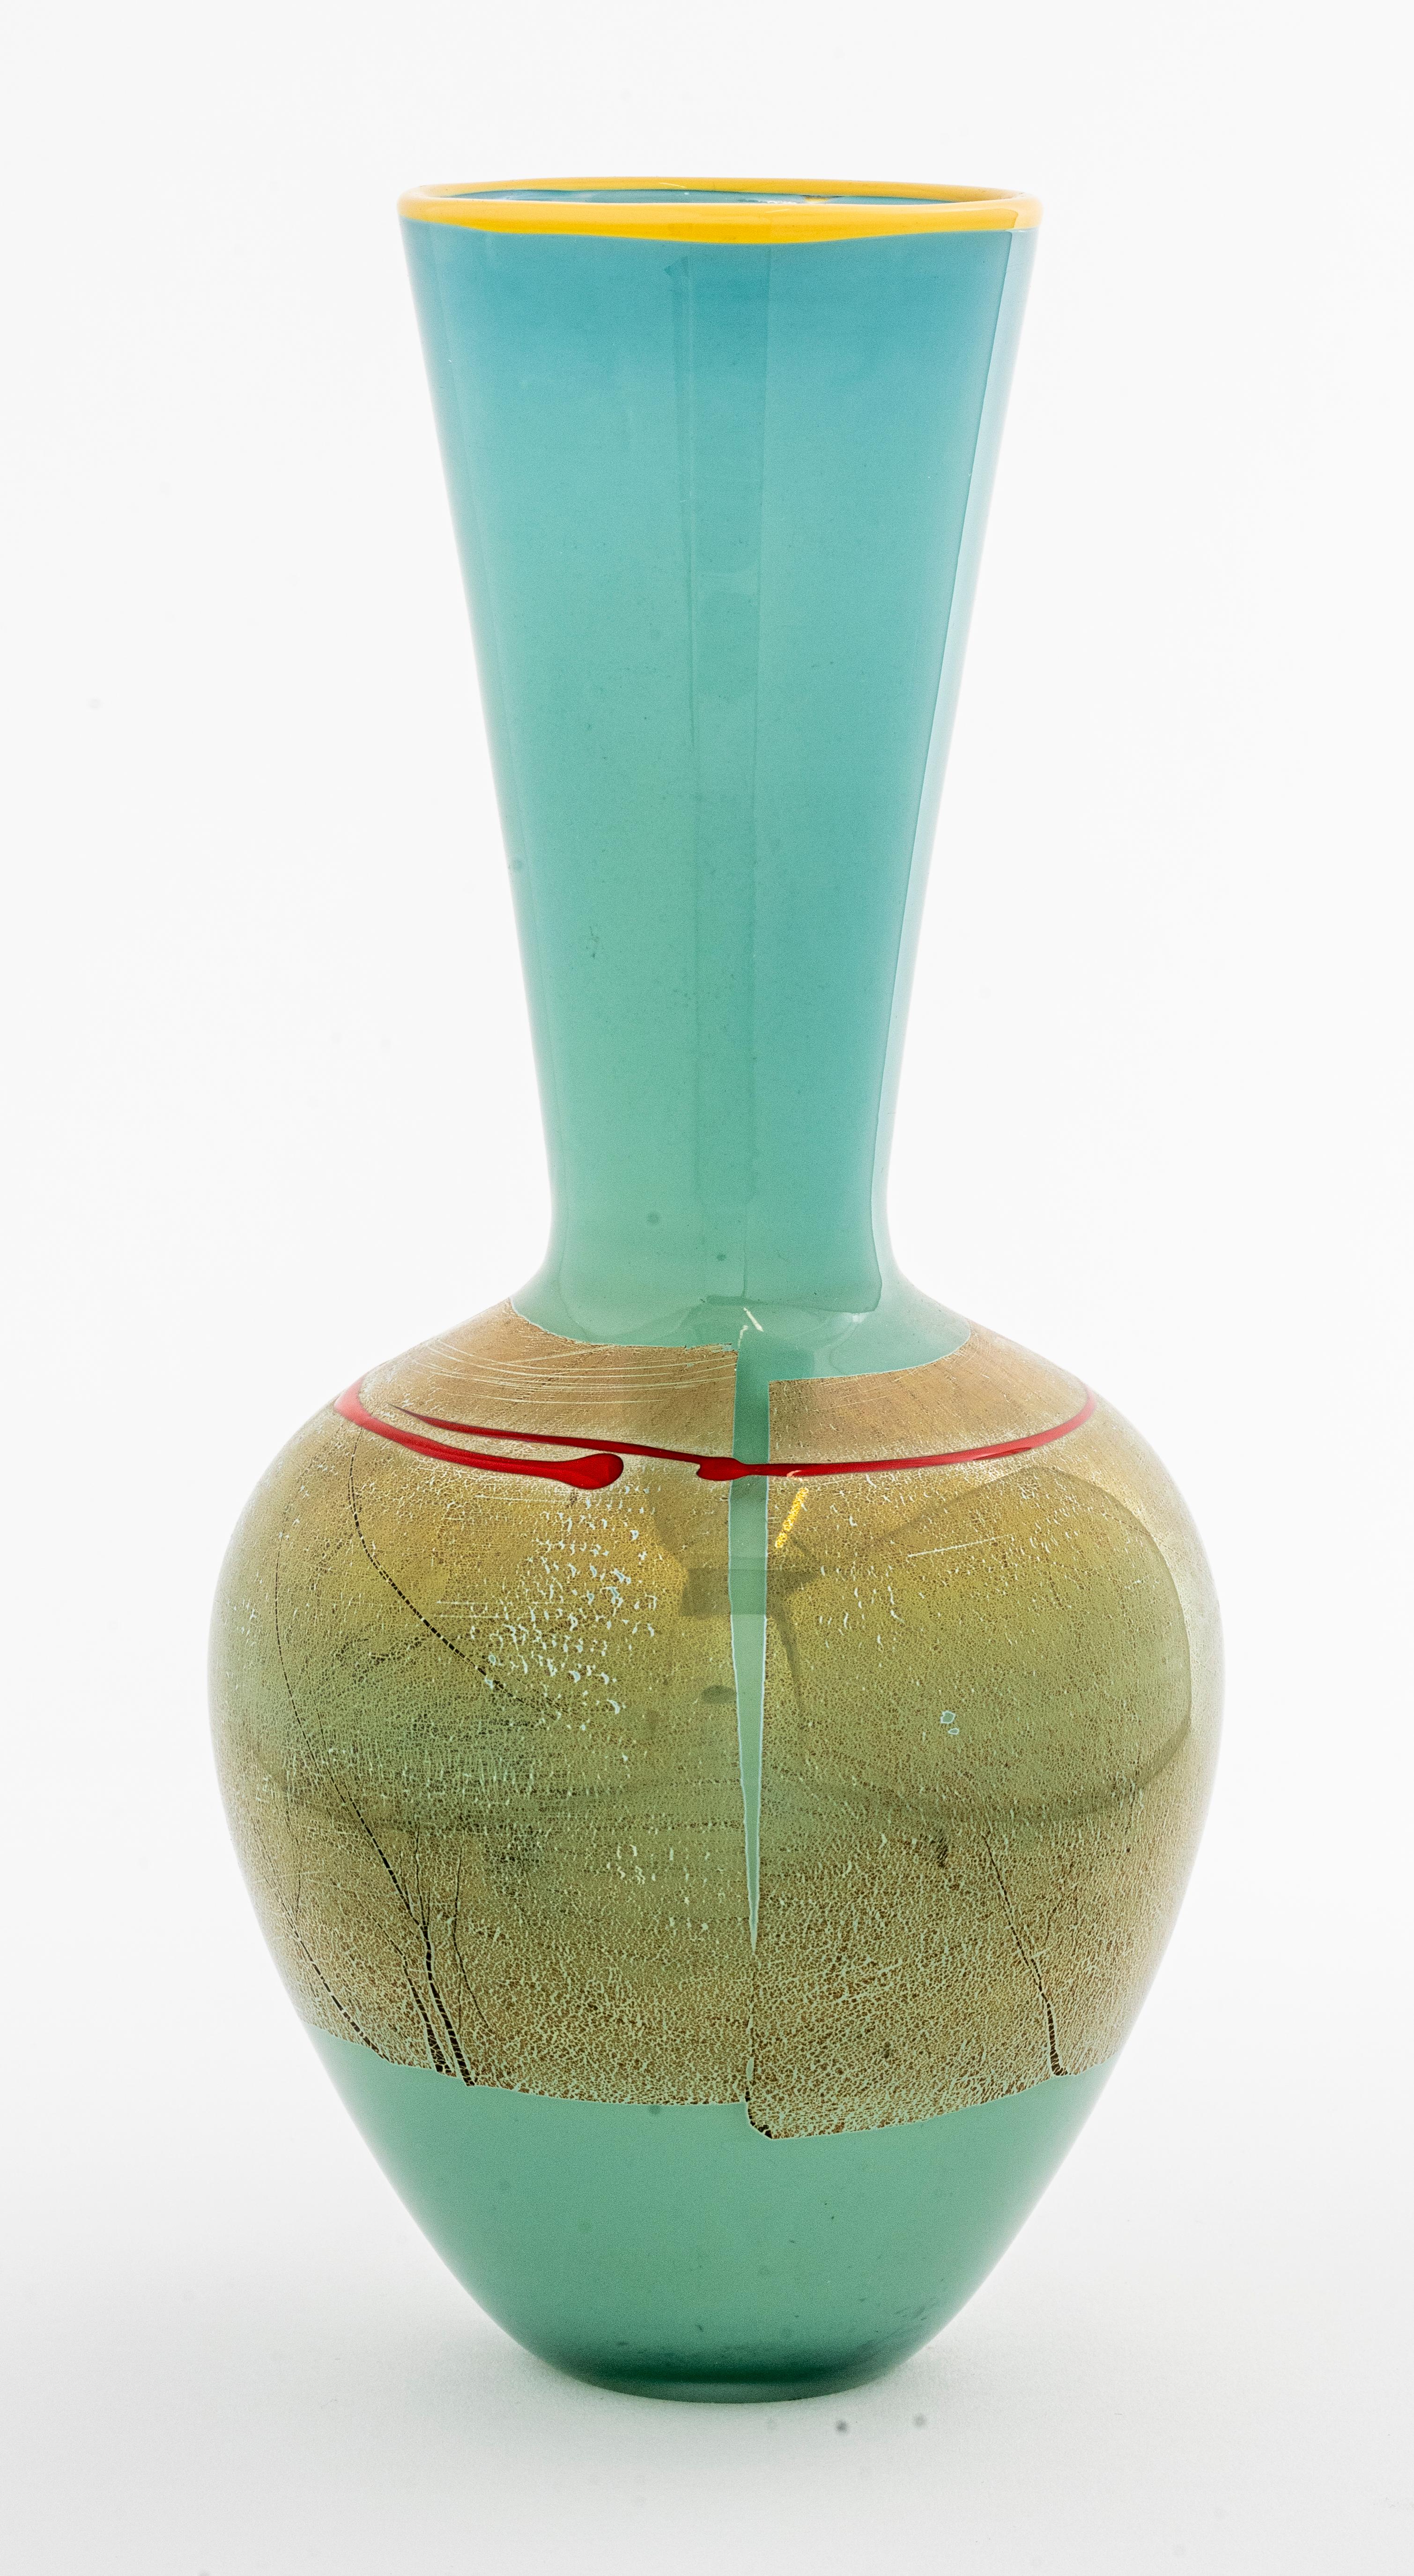 Modernist art glass vase by Studio Paran, 2007, signed. and dated.